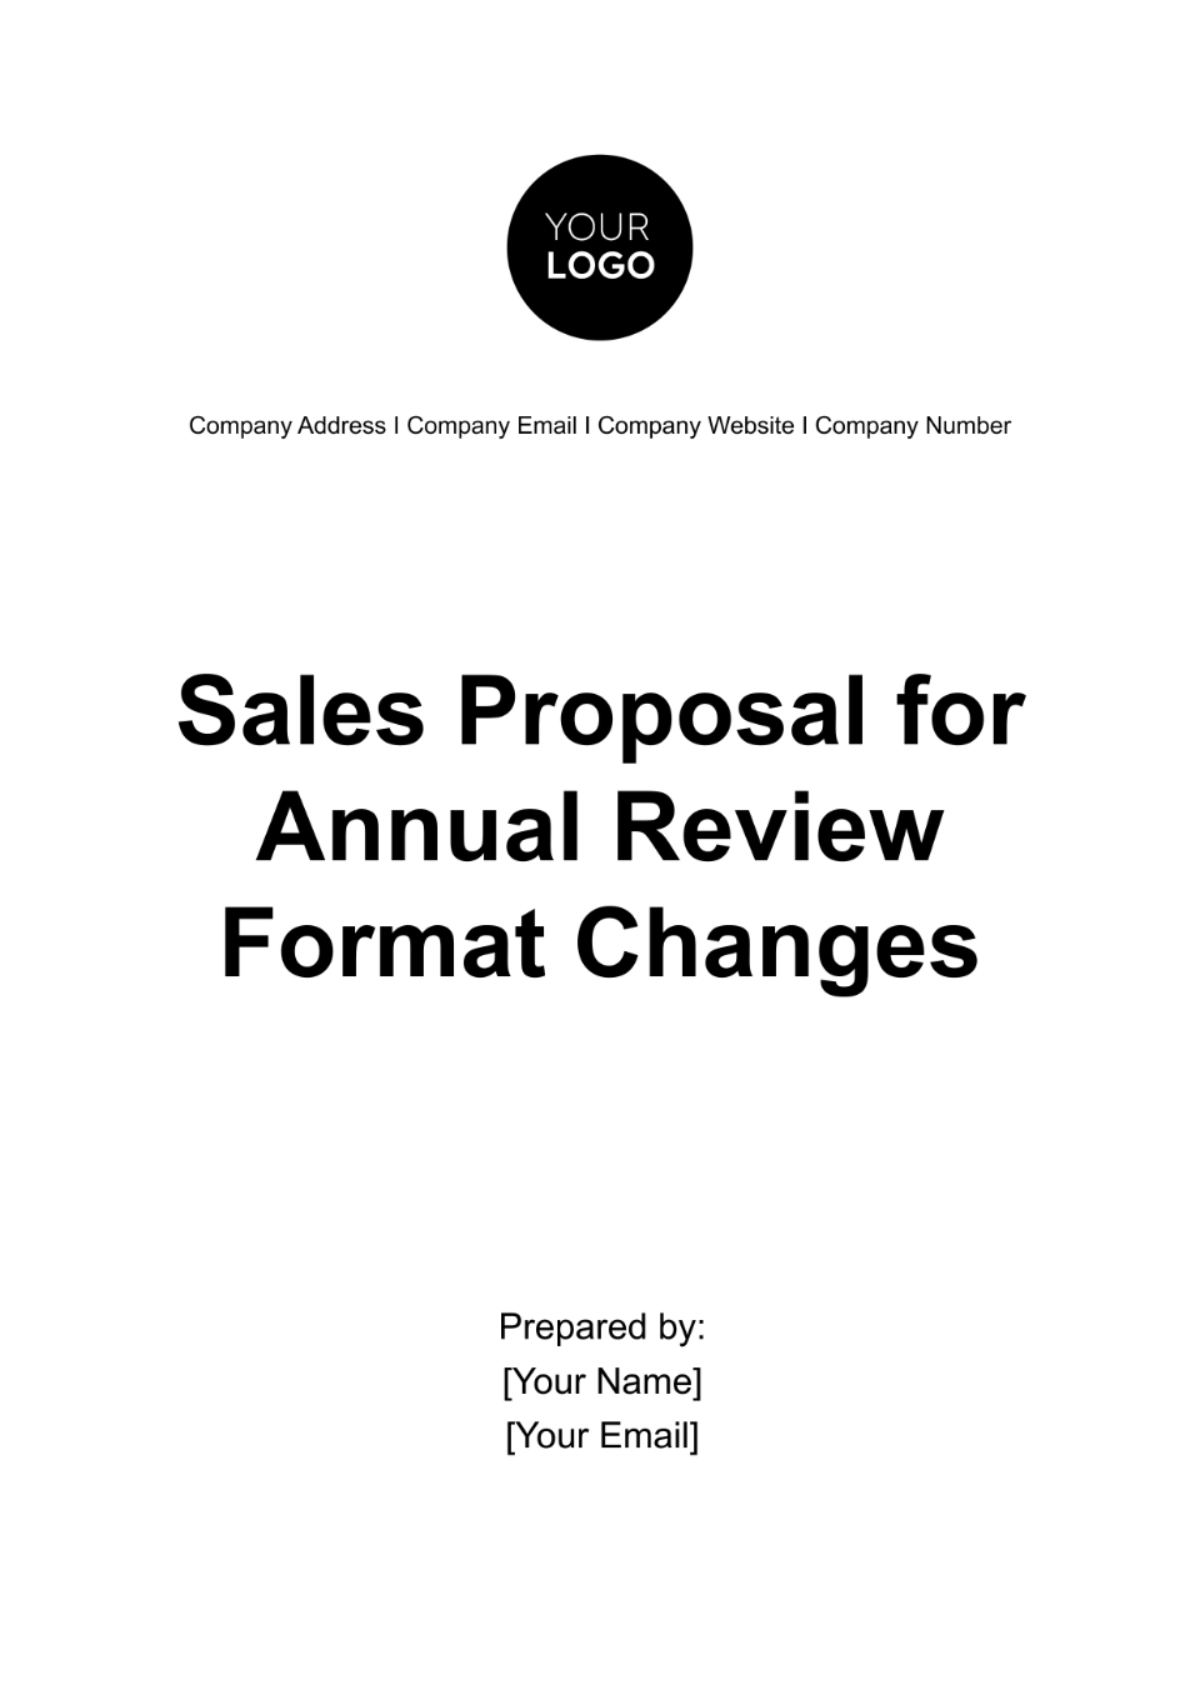 Free Sales Proposal for Annual Review Format Changes Template